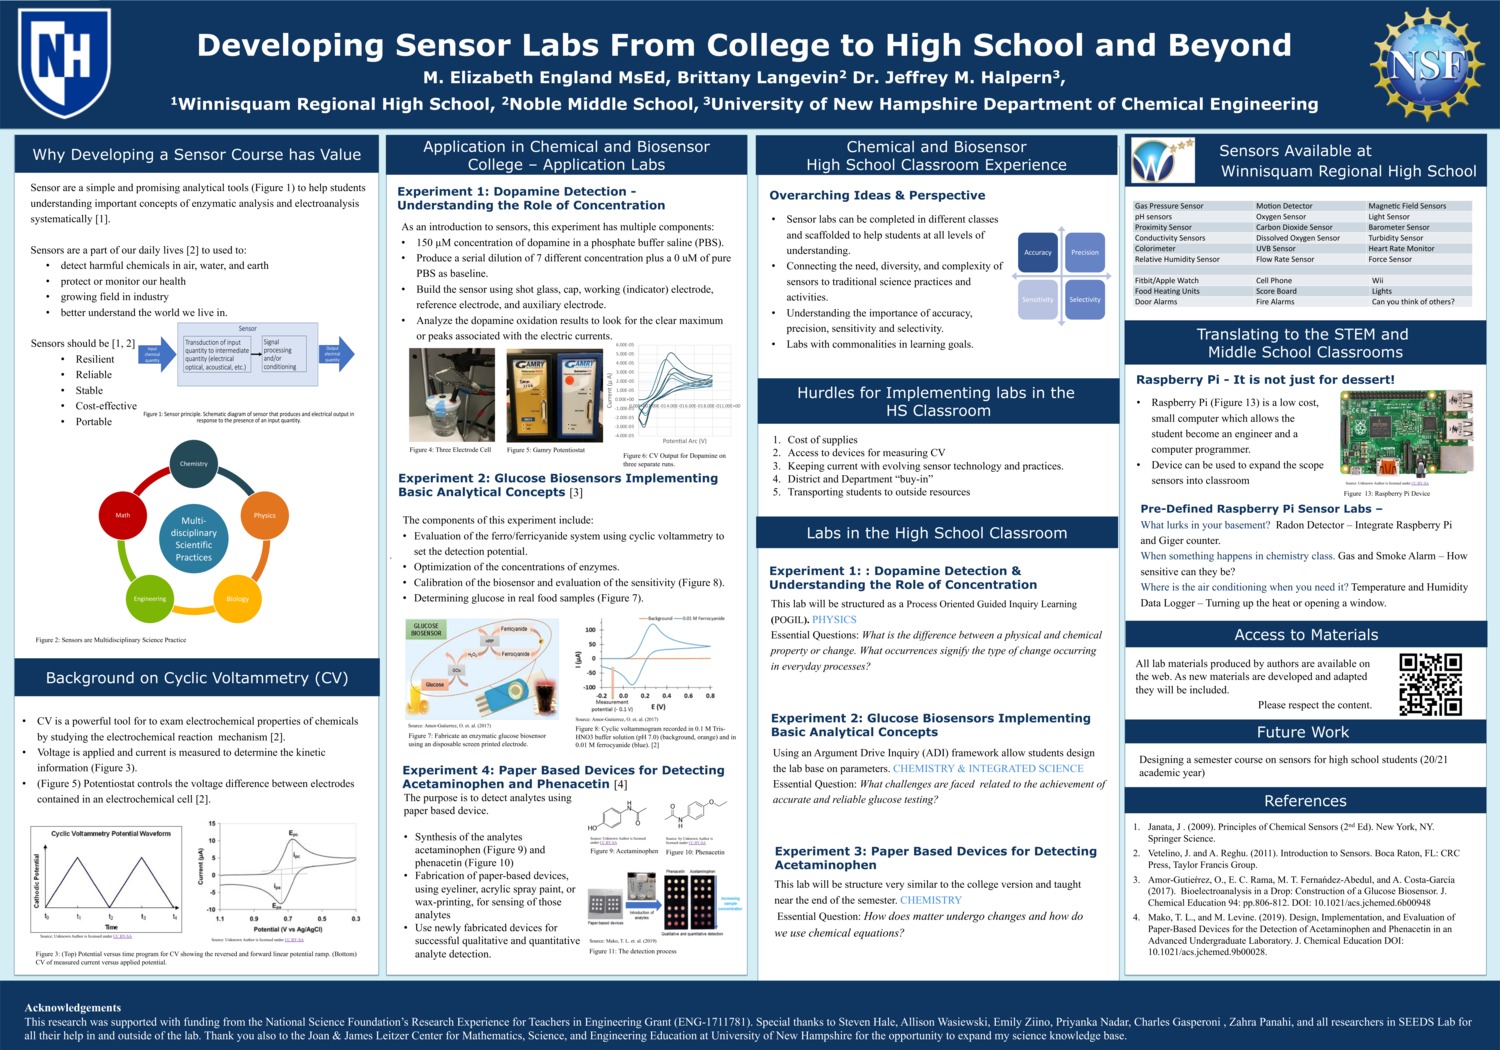 Biosensors From College To High School by ElizE